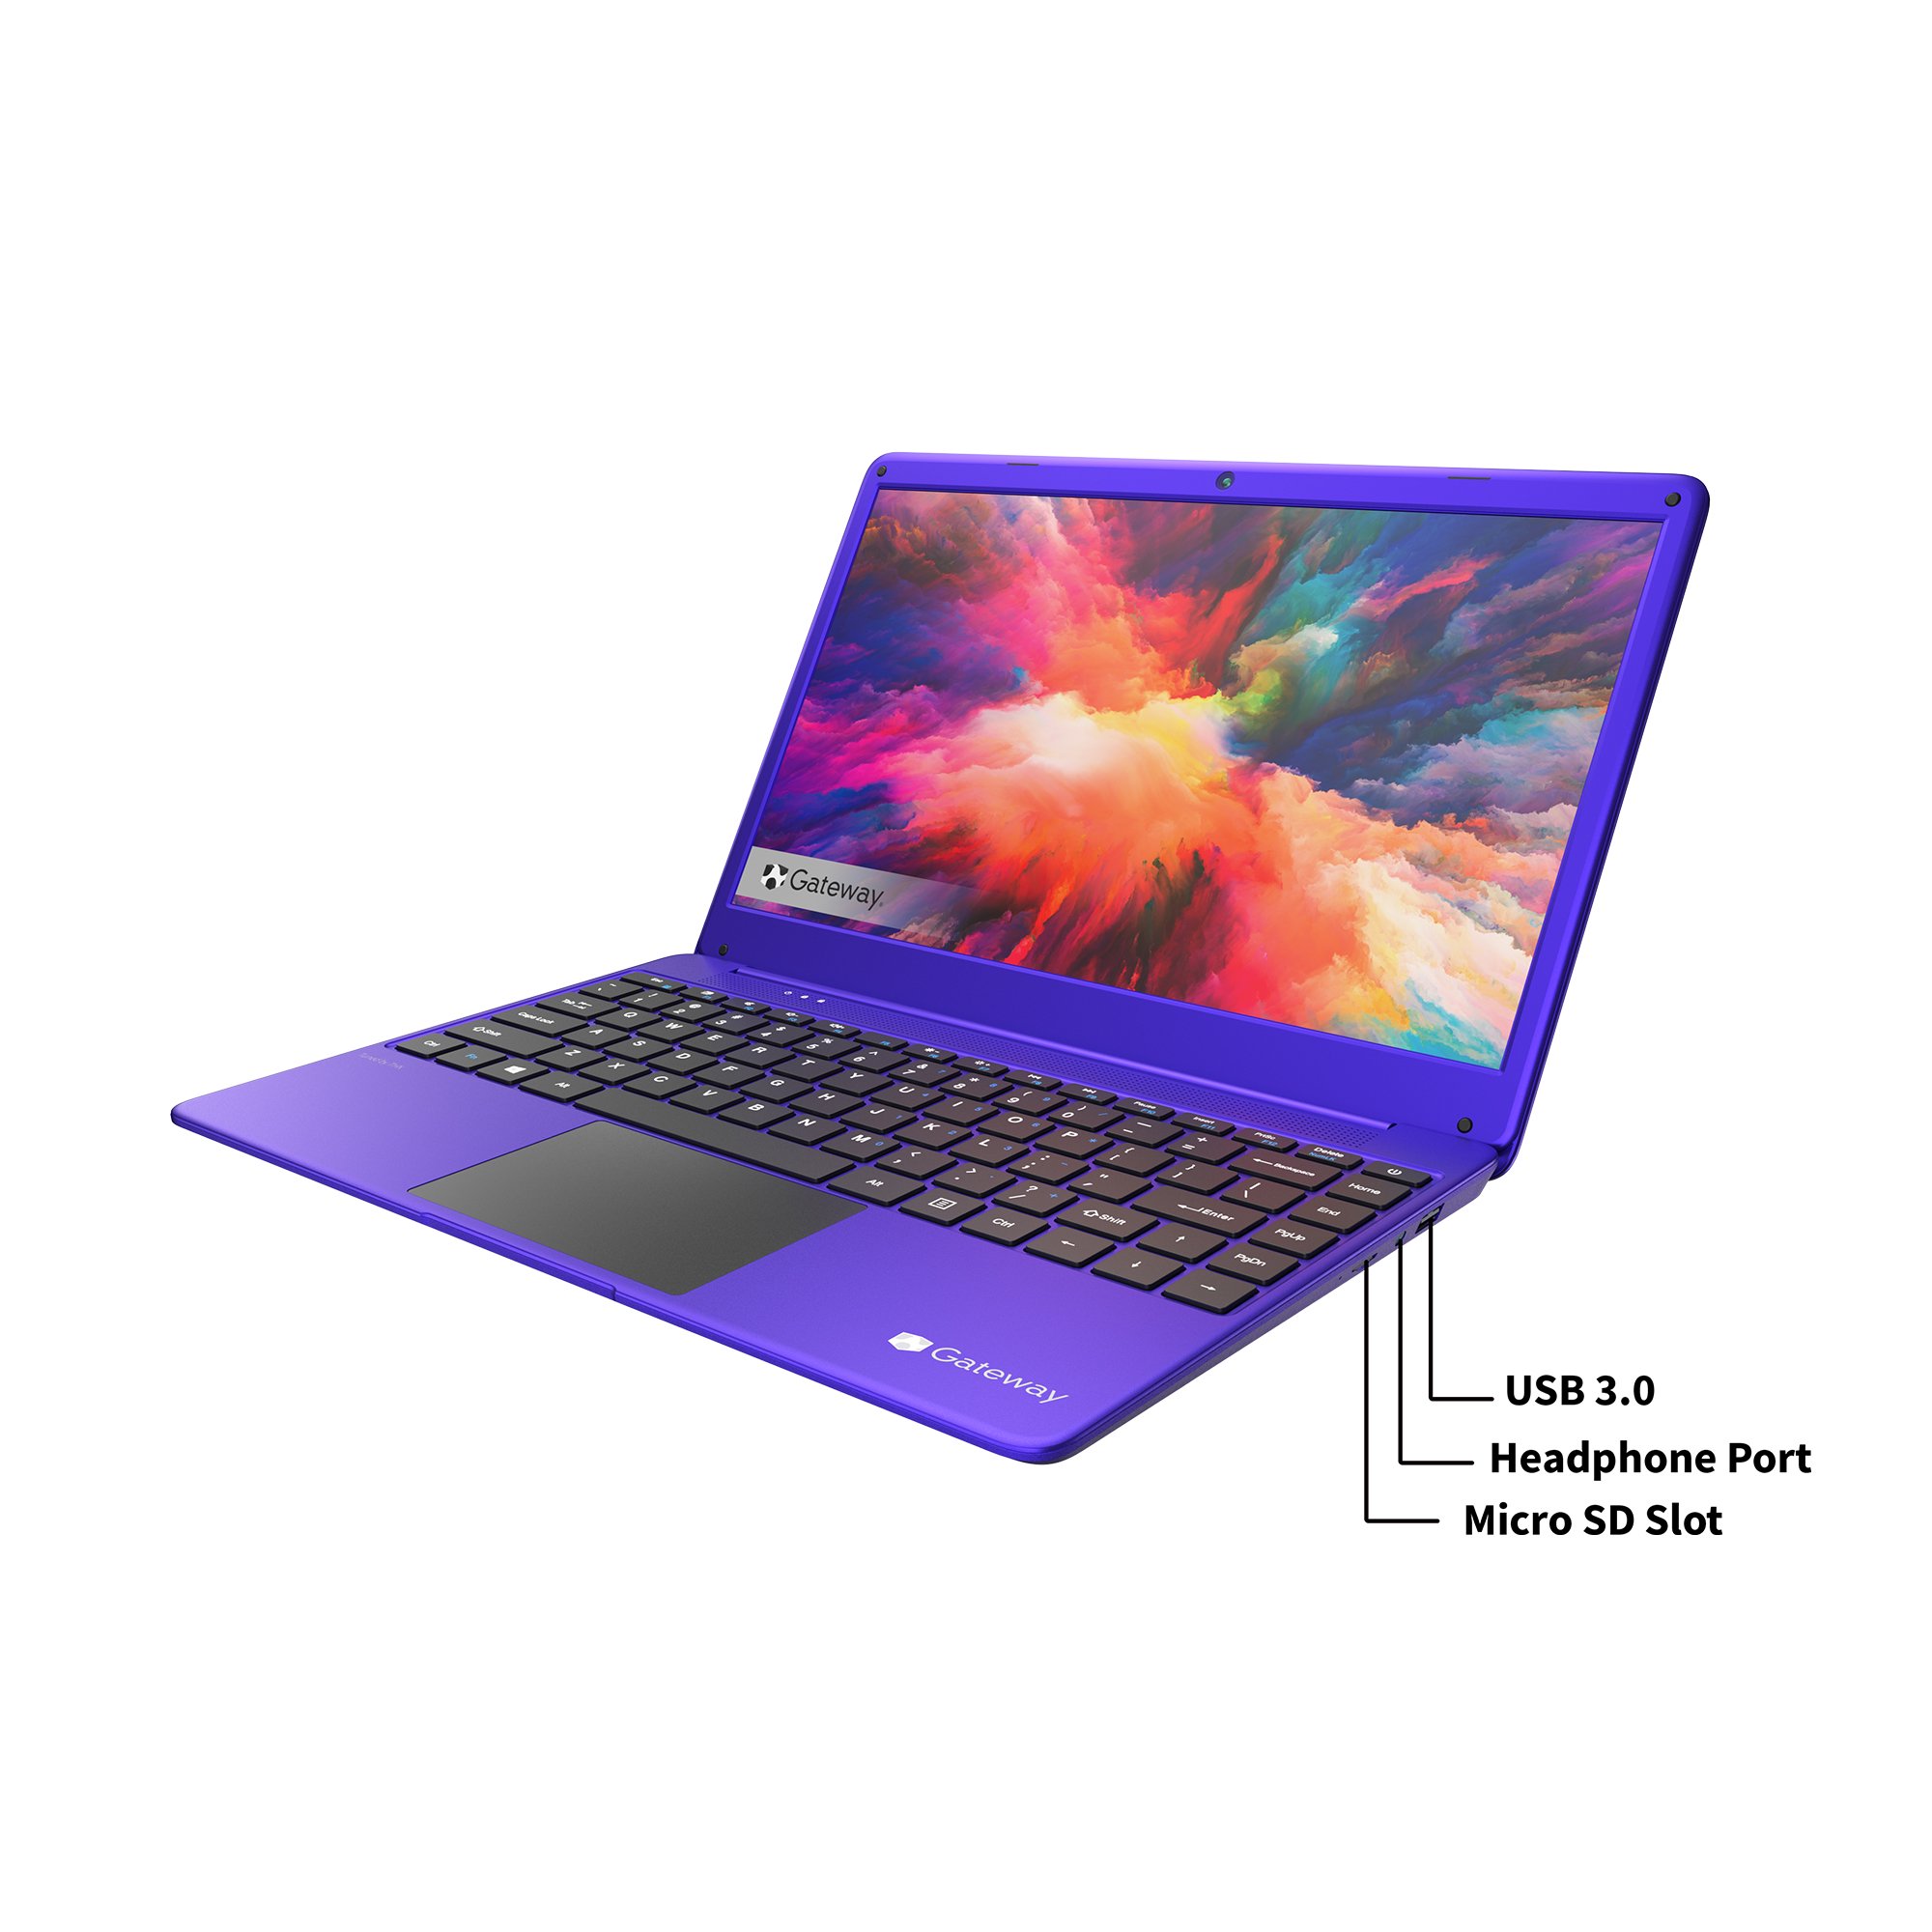 Gateway Ultra Slim Notebook Core i3 1115G4 14.1 ” FHD LCD IPS 4 GB memory RAM 128 GB M.2 SSD storage and NVMe supported Built-in Fingerprint windows 10 purple color GWTN1416pR